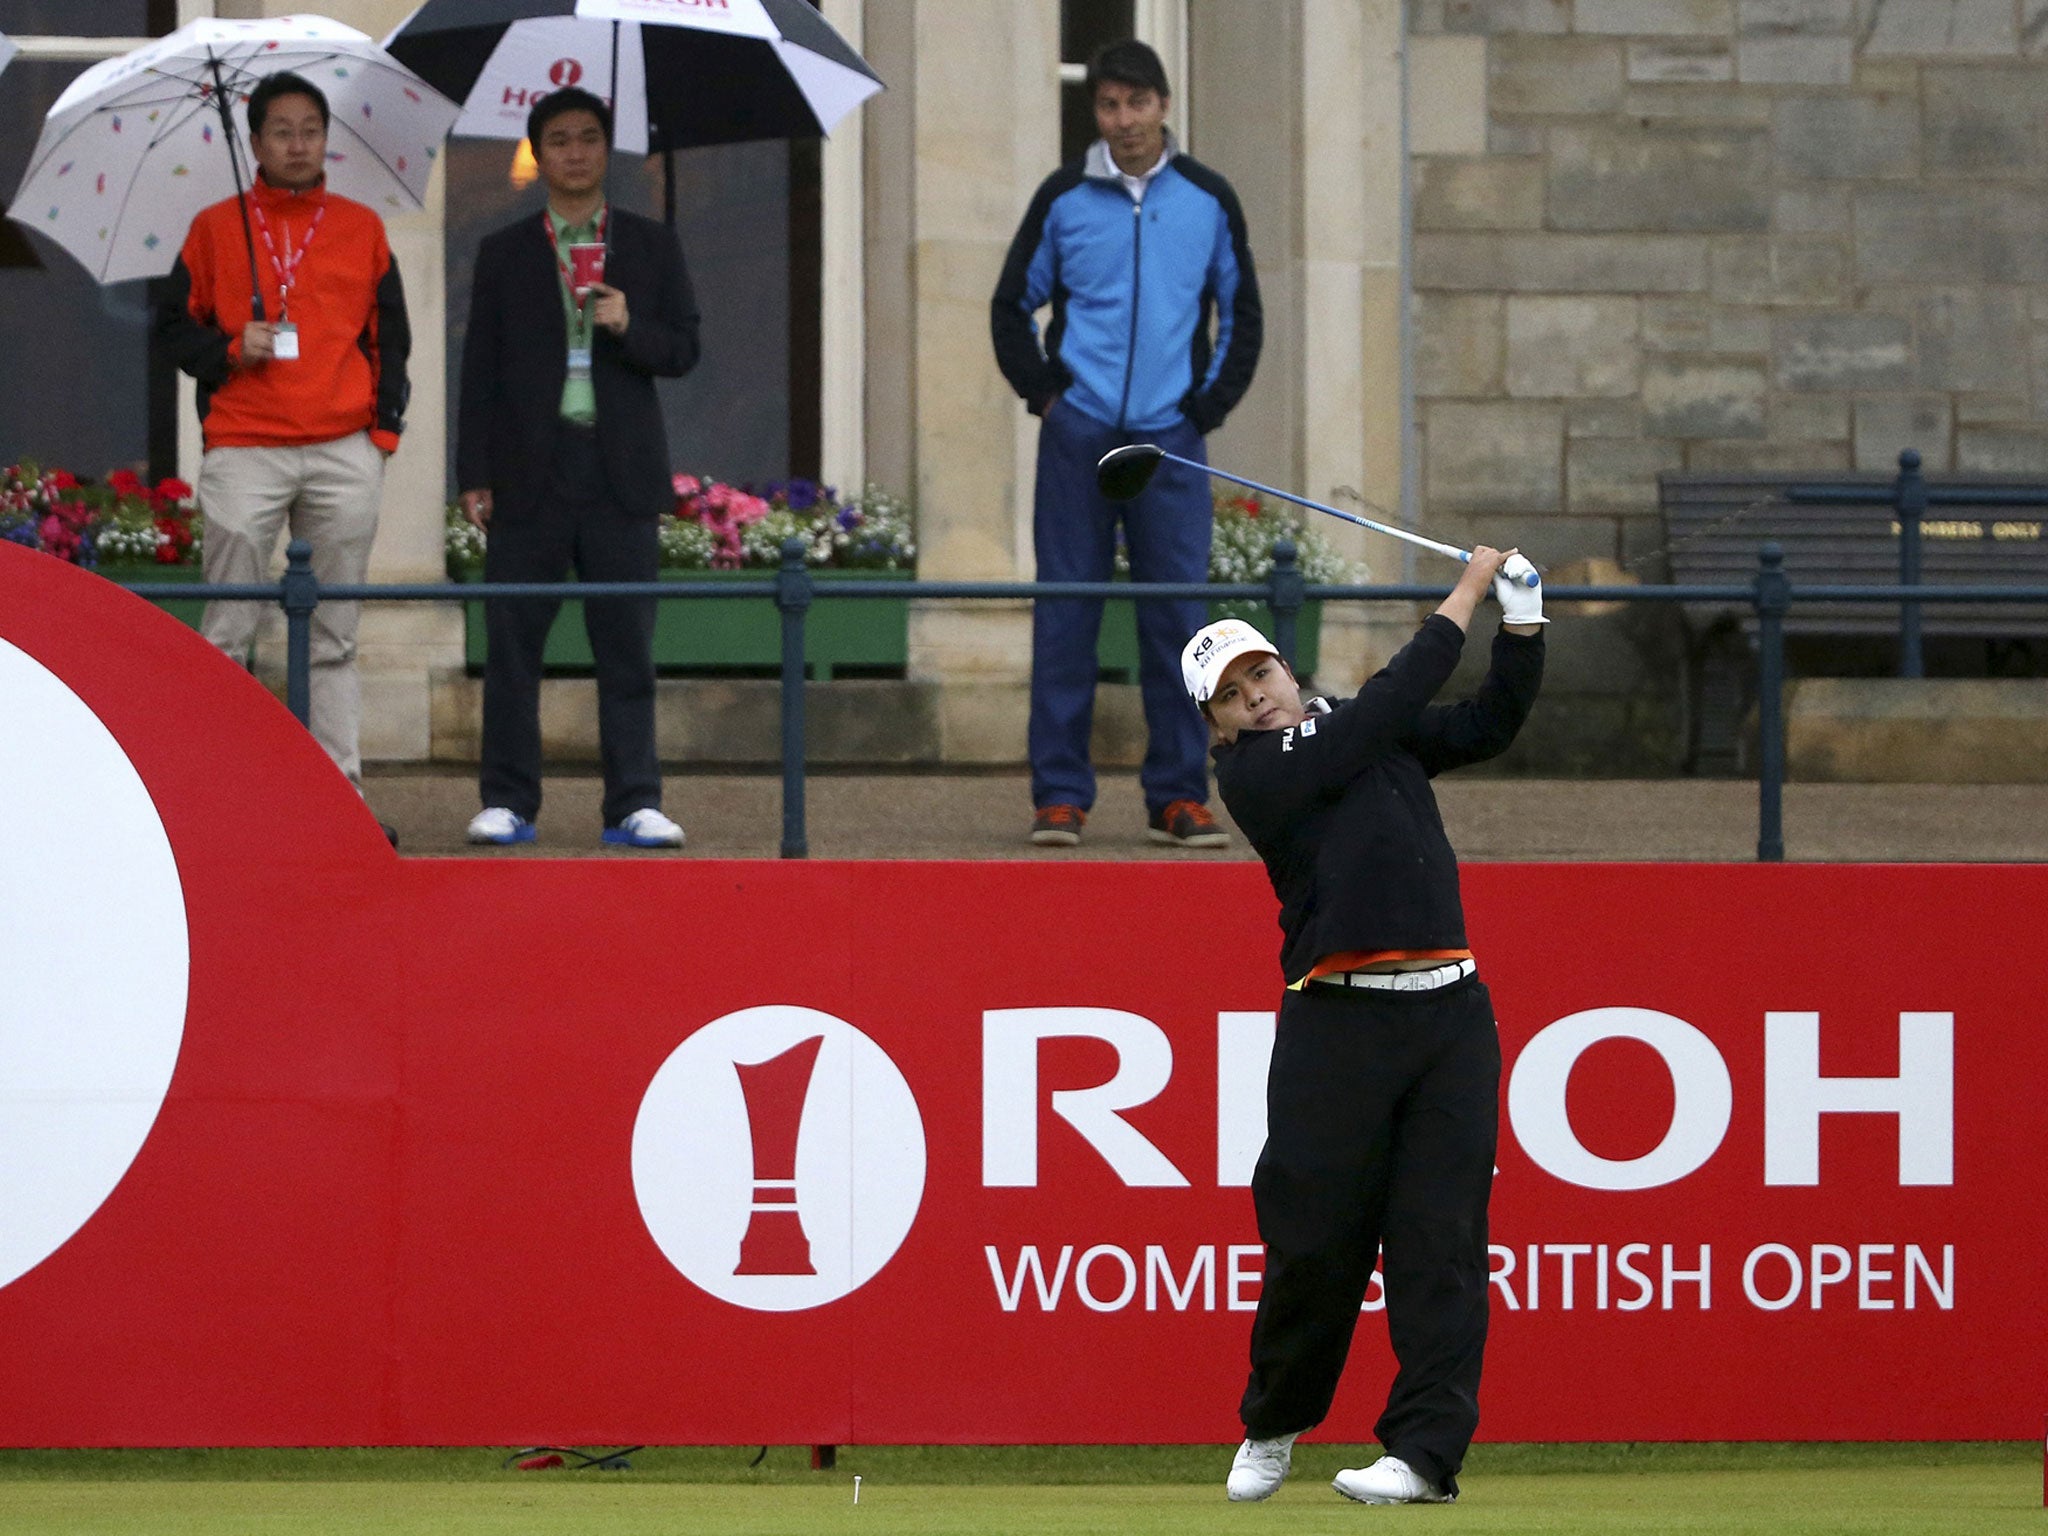 Inbee Park had an early start at St Andrews and carded an opening 69